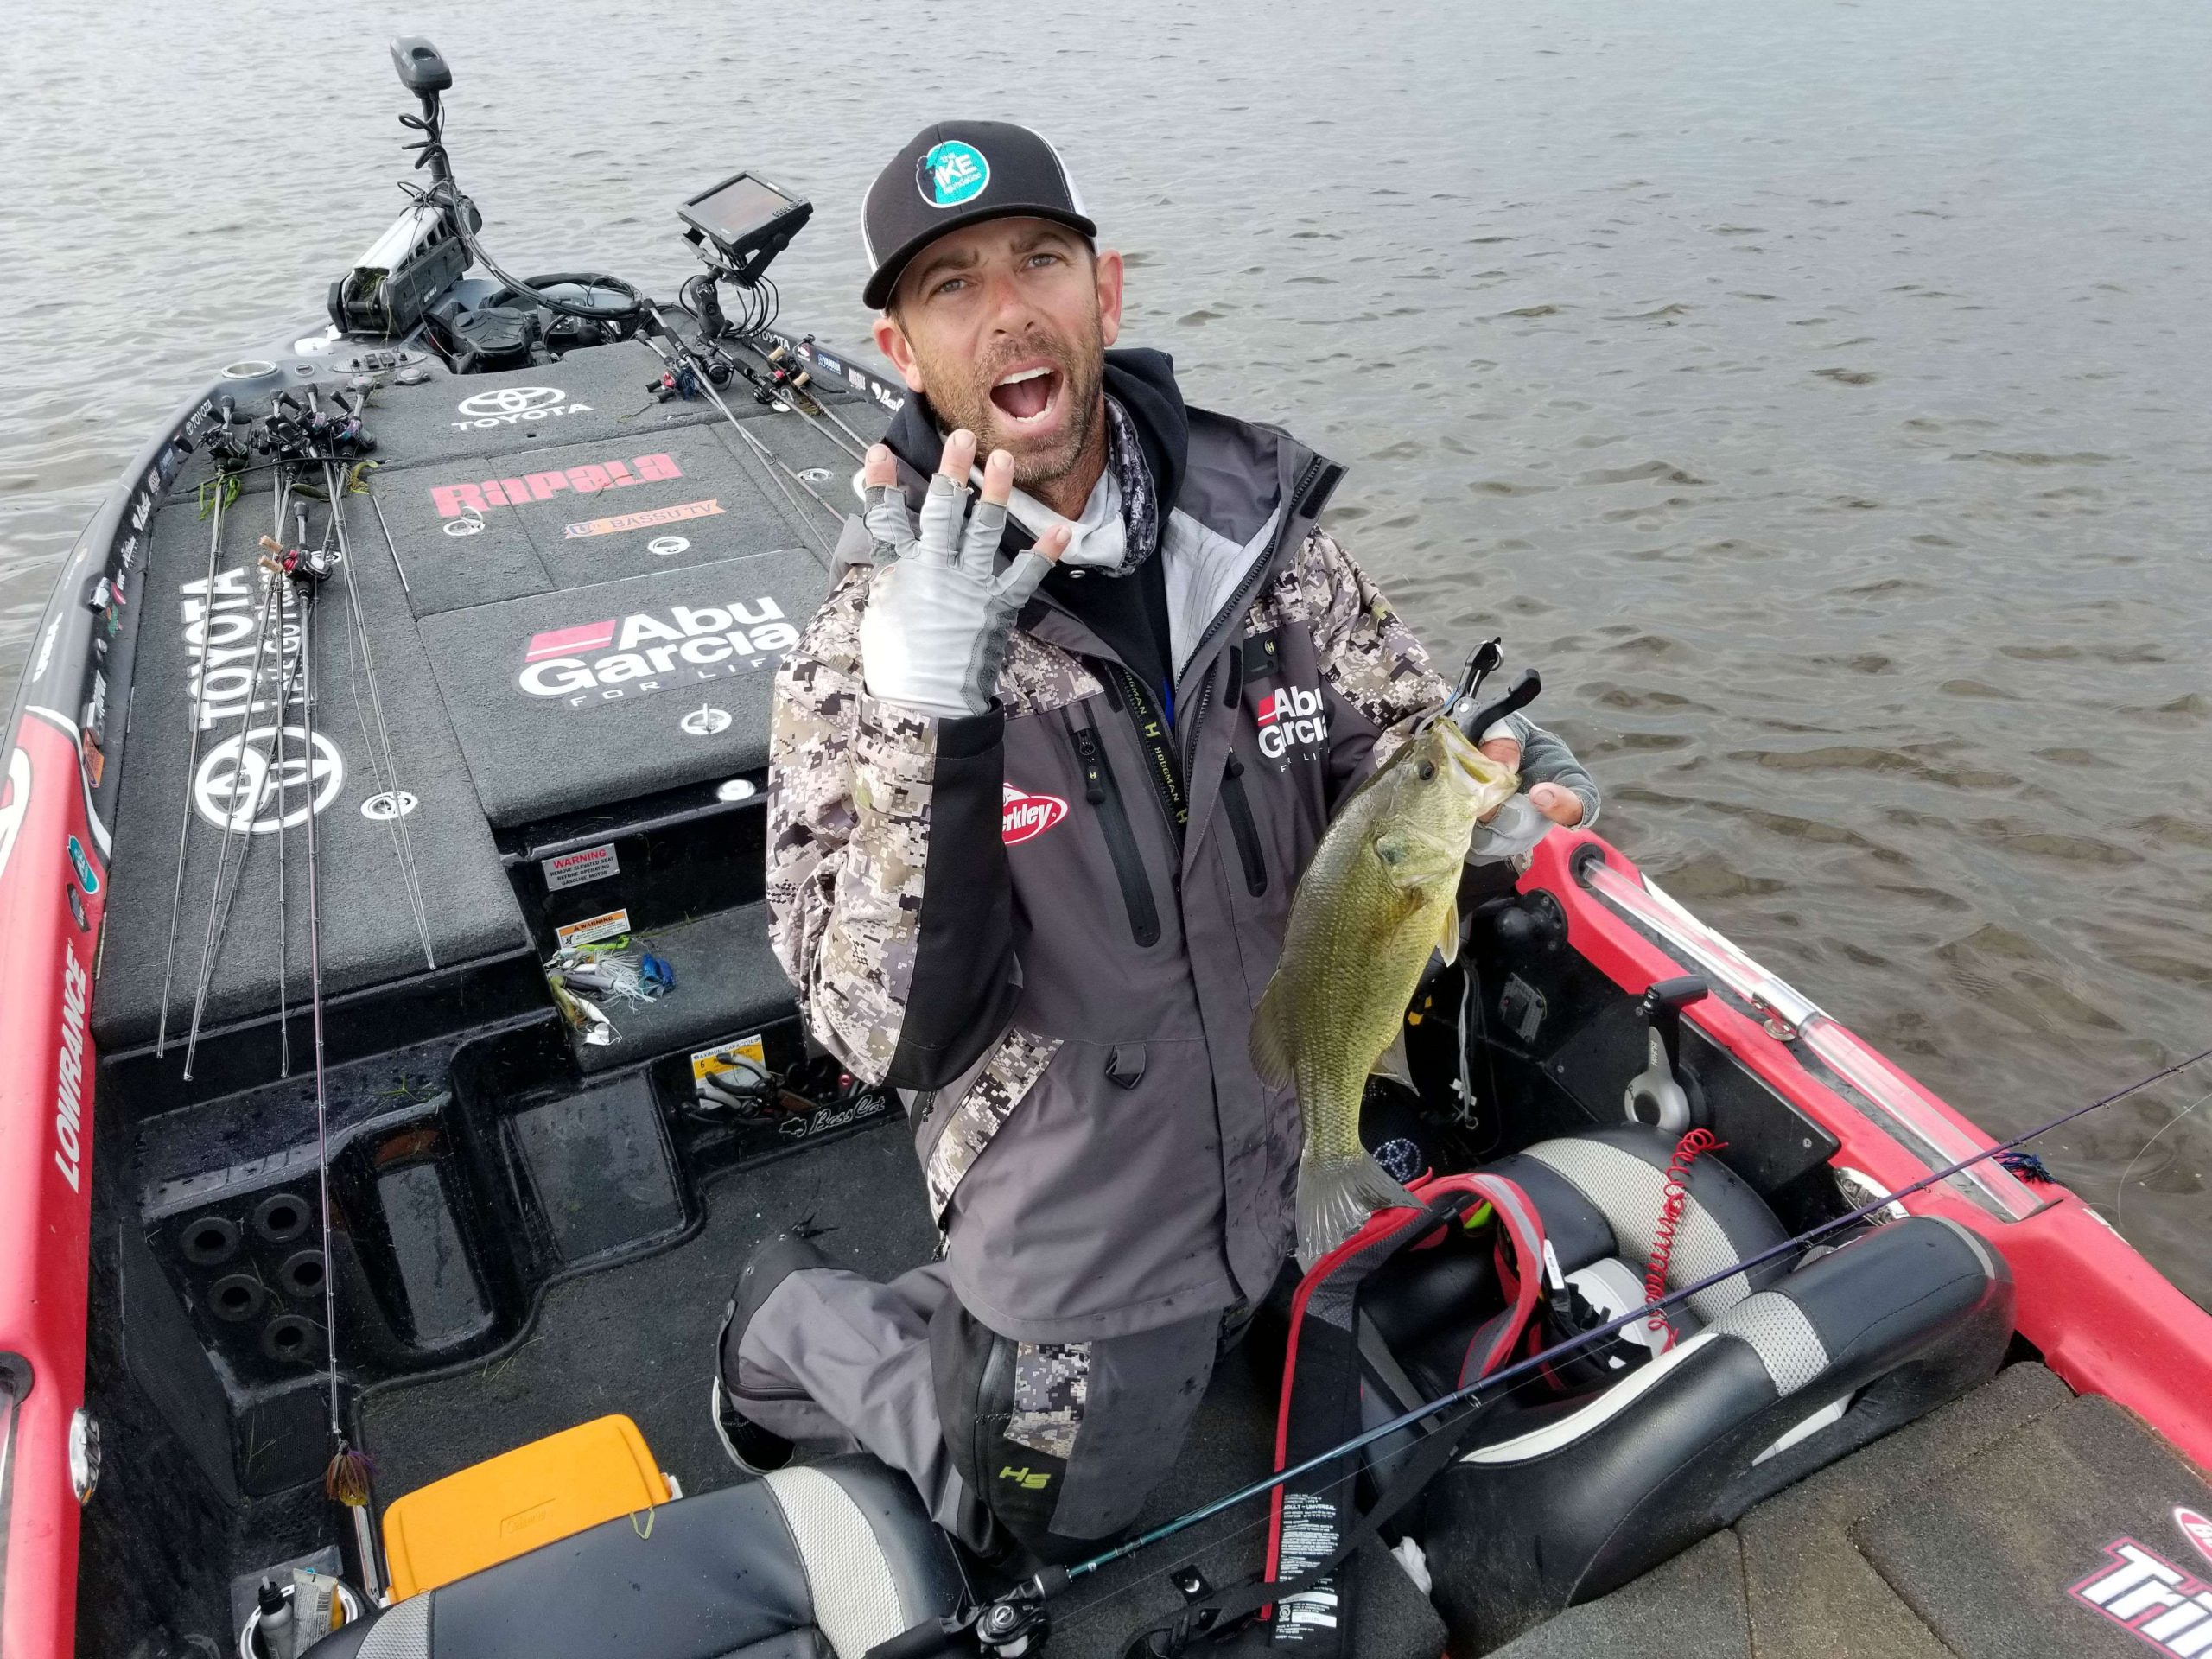 Four for Iaconelli. 